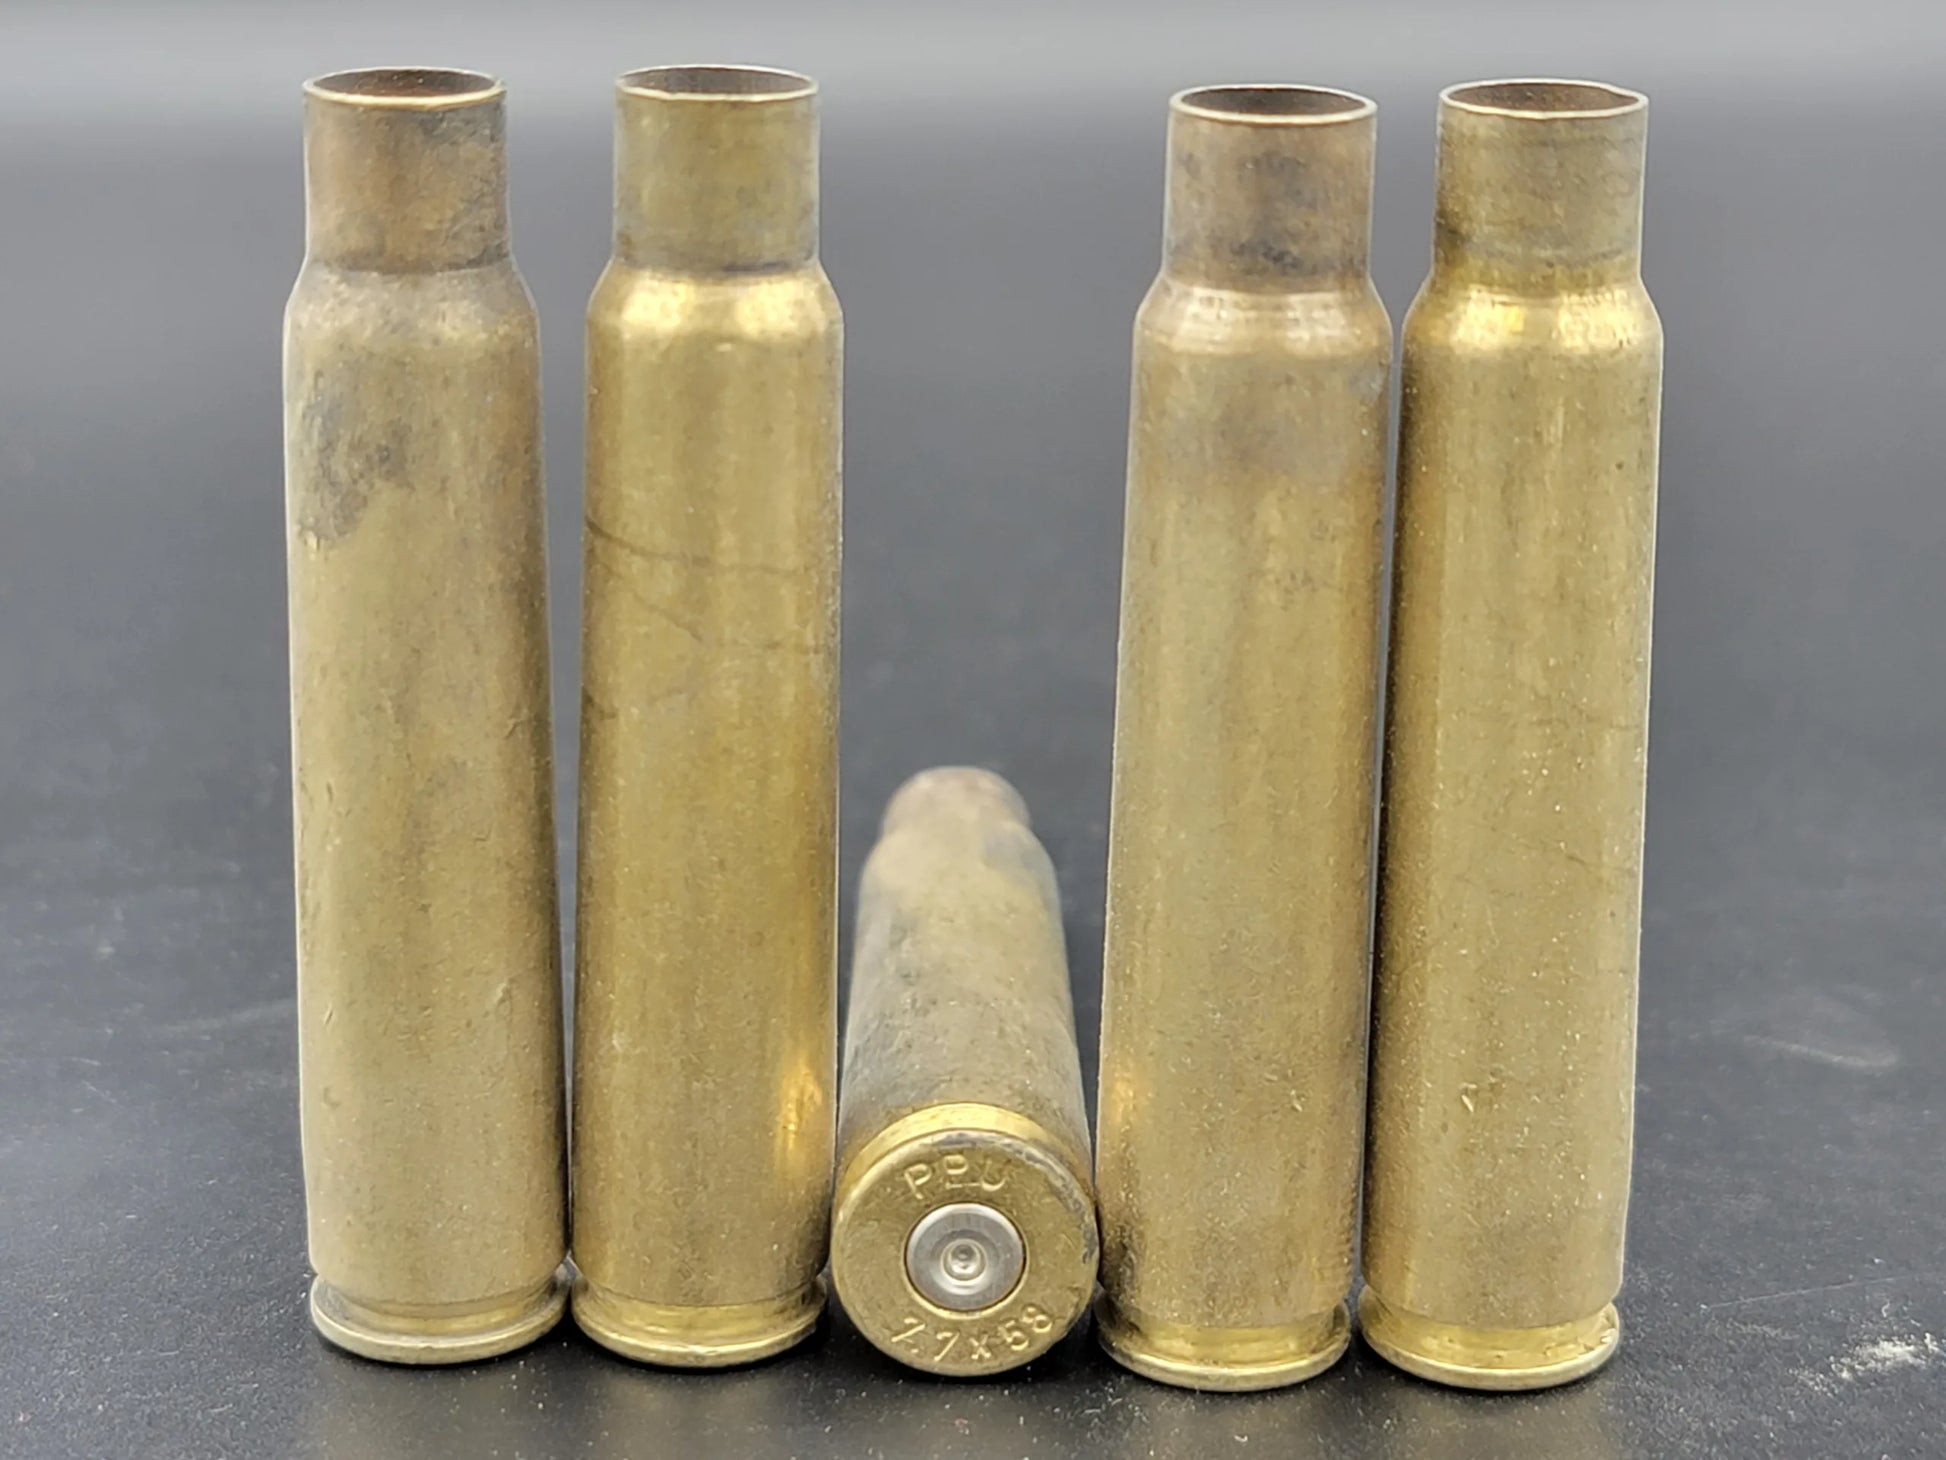 7.7x58 once fired rifle brass. Hand sorted from reputable indoor/military ranges for reloading. Reliable spent casings for precision shooting.